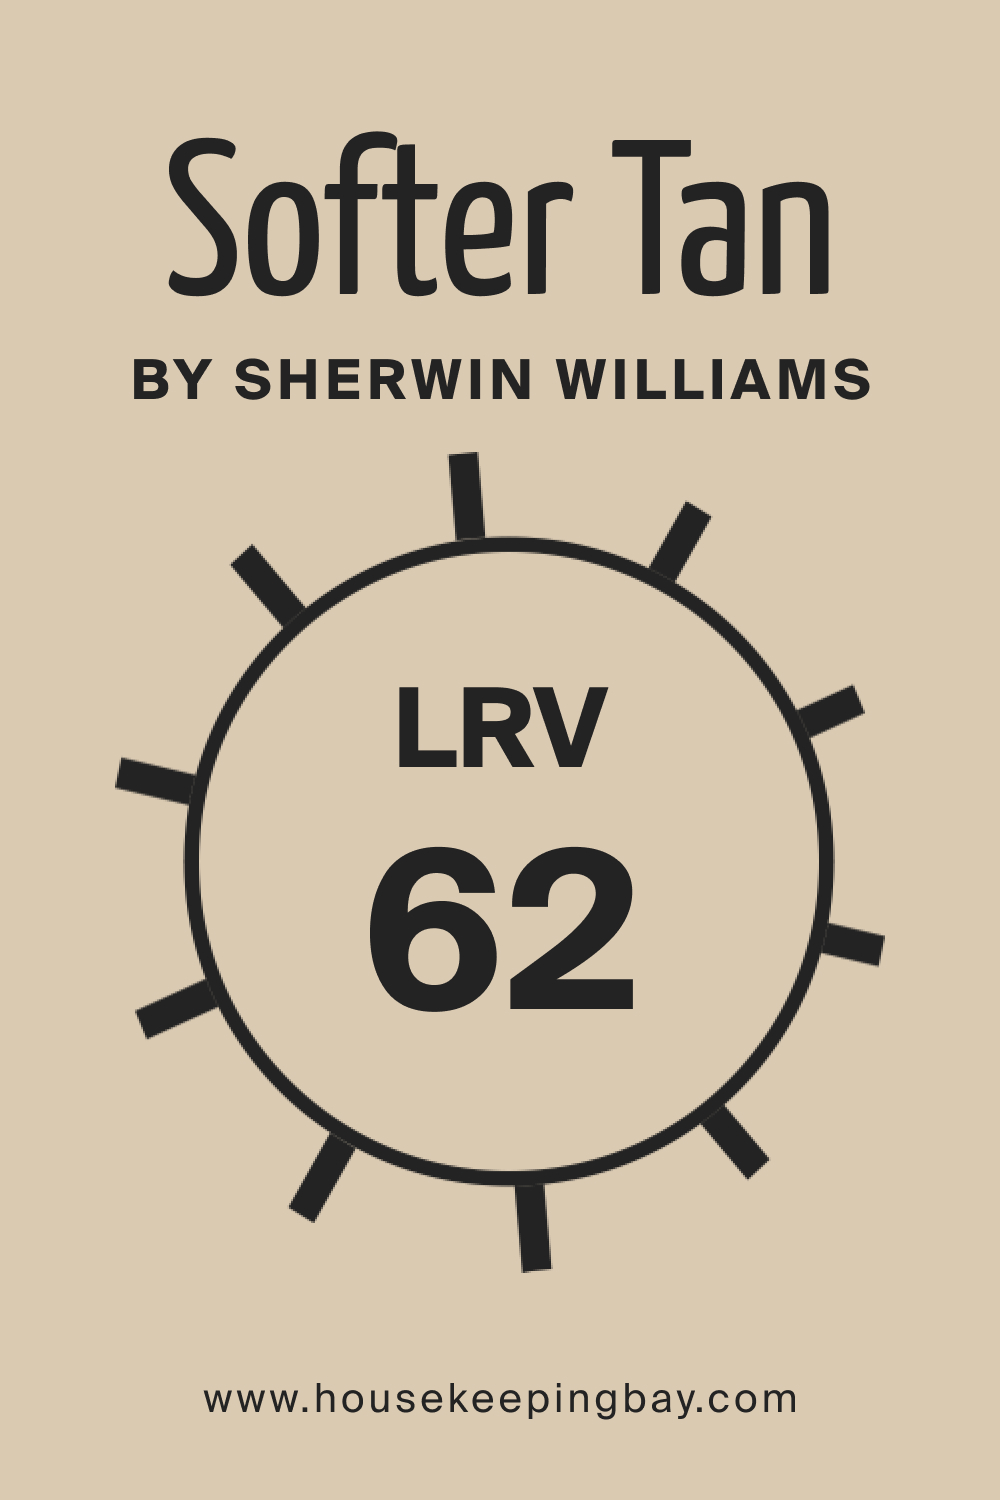 SW Softer Tan by Sherwin Williams. LRV – 62